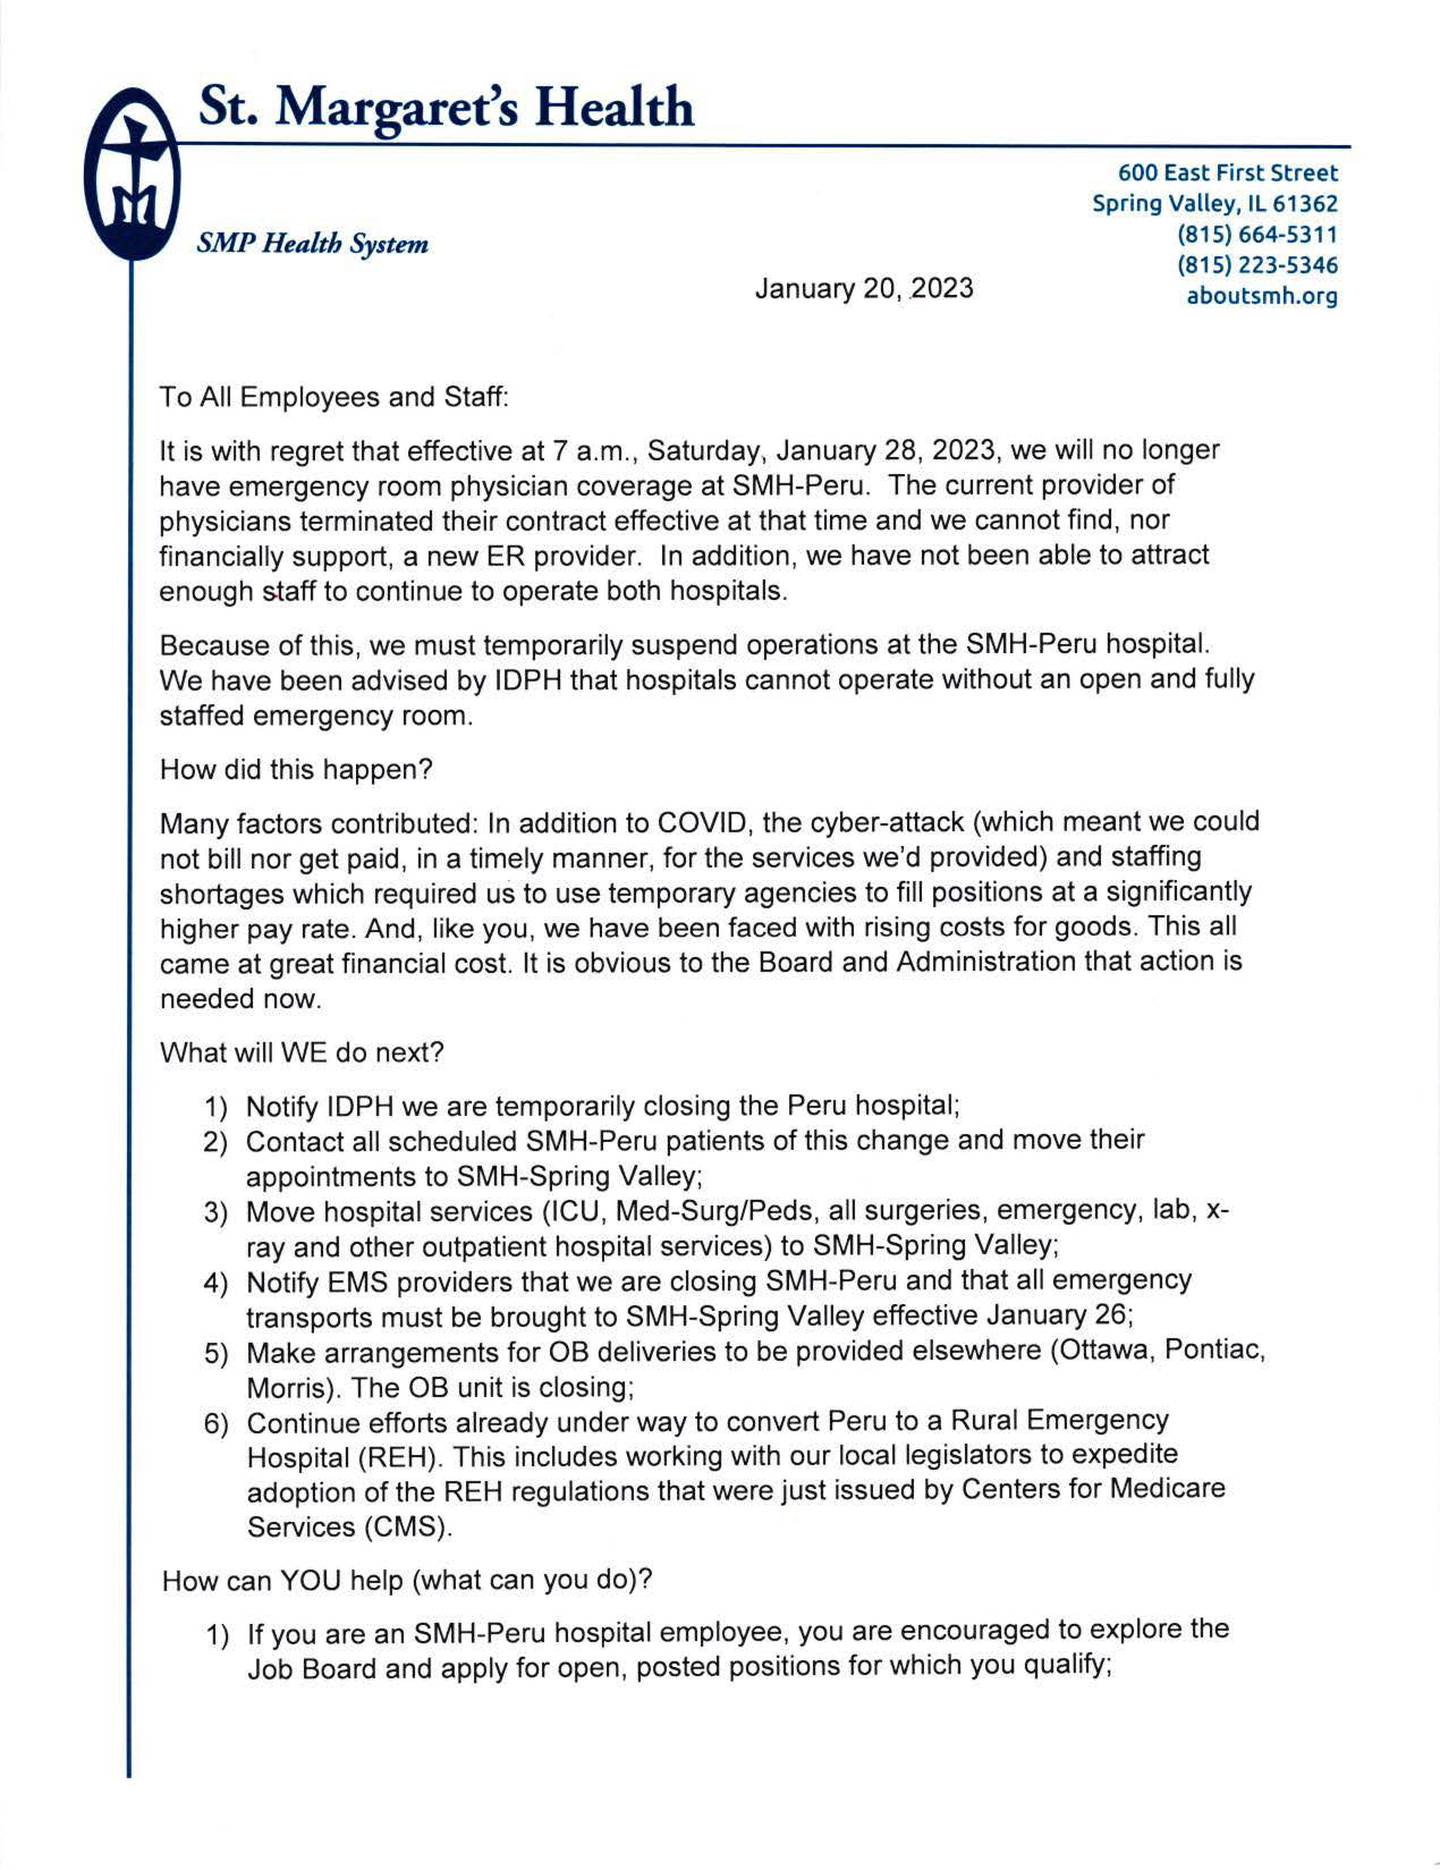 St. Margaret's Health shared a letter it sent to employees and staff about its Saturday, Jan. 28, 2023, closure.